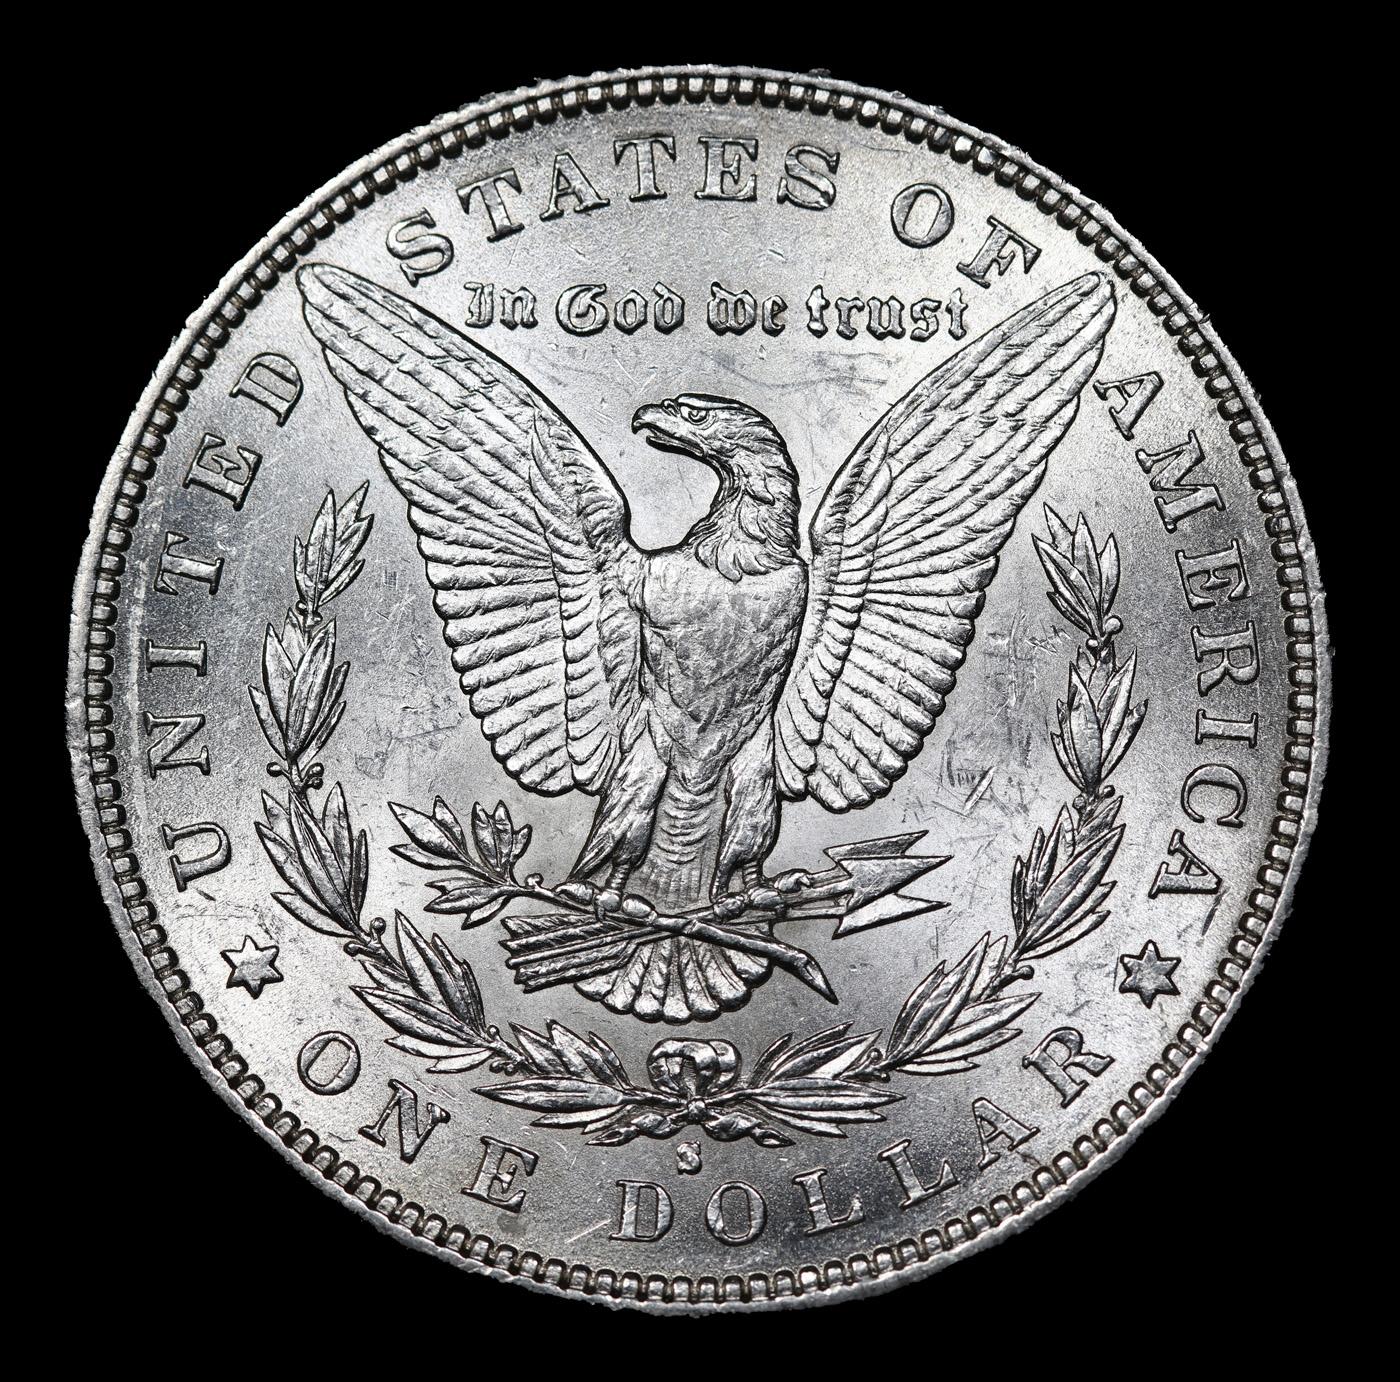 ***Auction Highlight*** 1883-s Morgan Dollar $1 Graded Select Unc+ PL By USCG (fc)